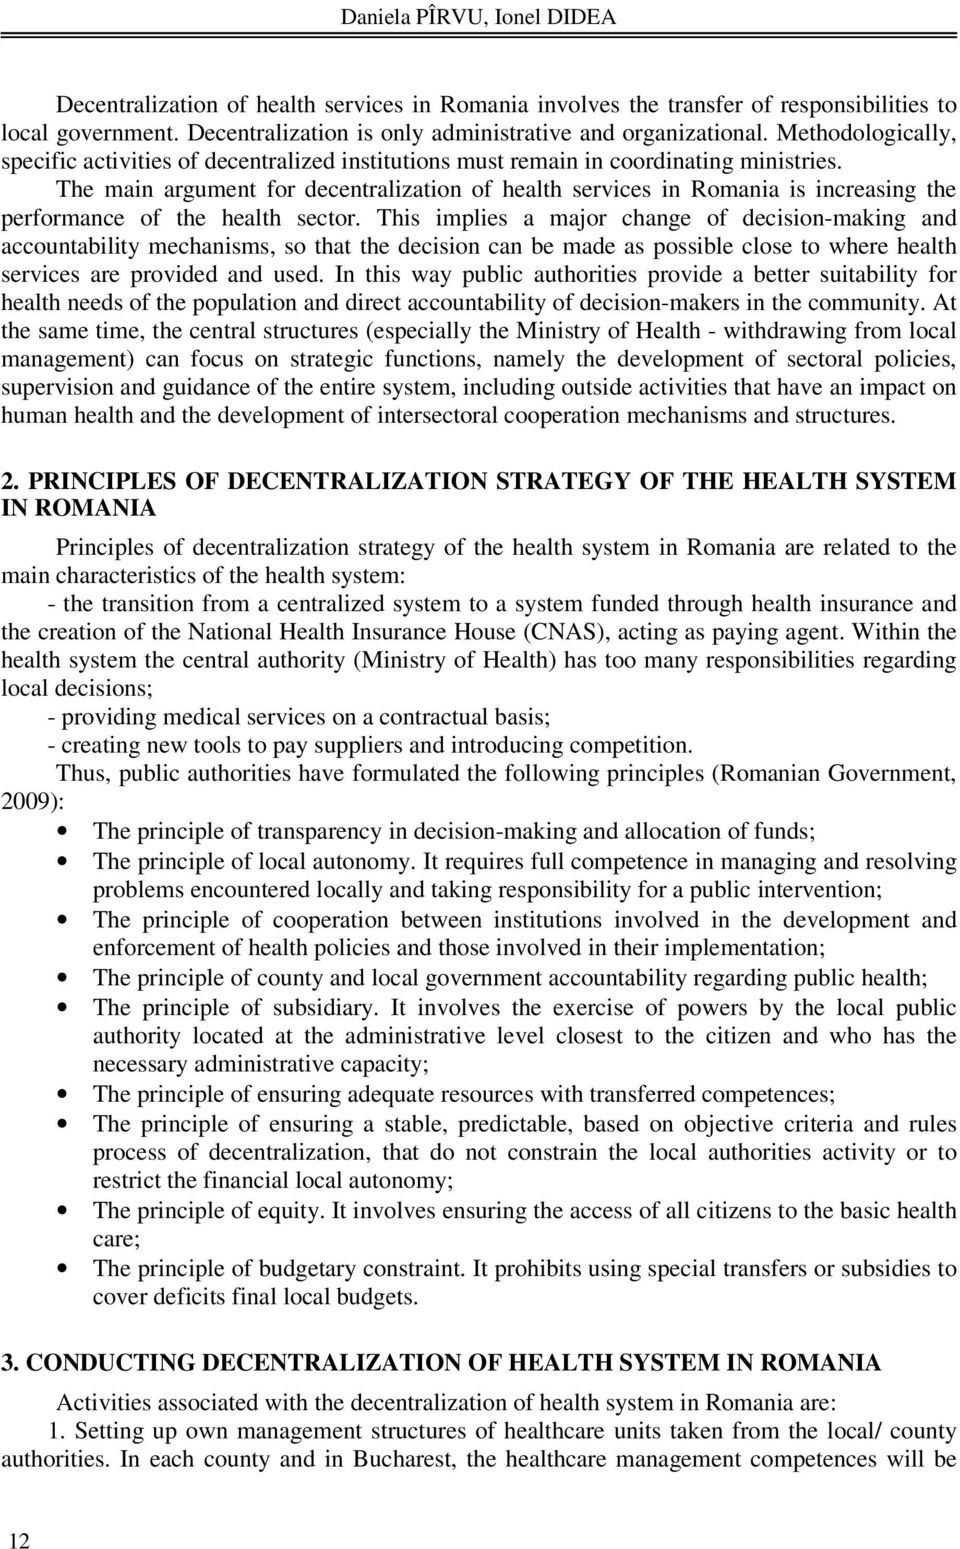 The main argument for decentralization of health services in Romania is increasing the performance of the health sector.